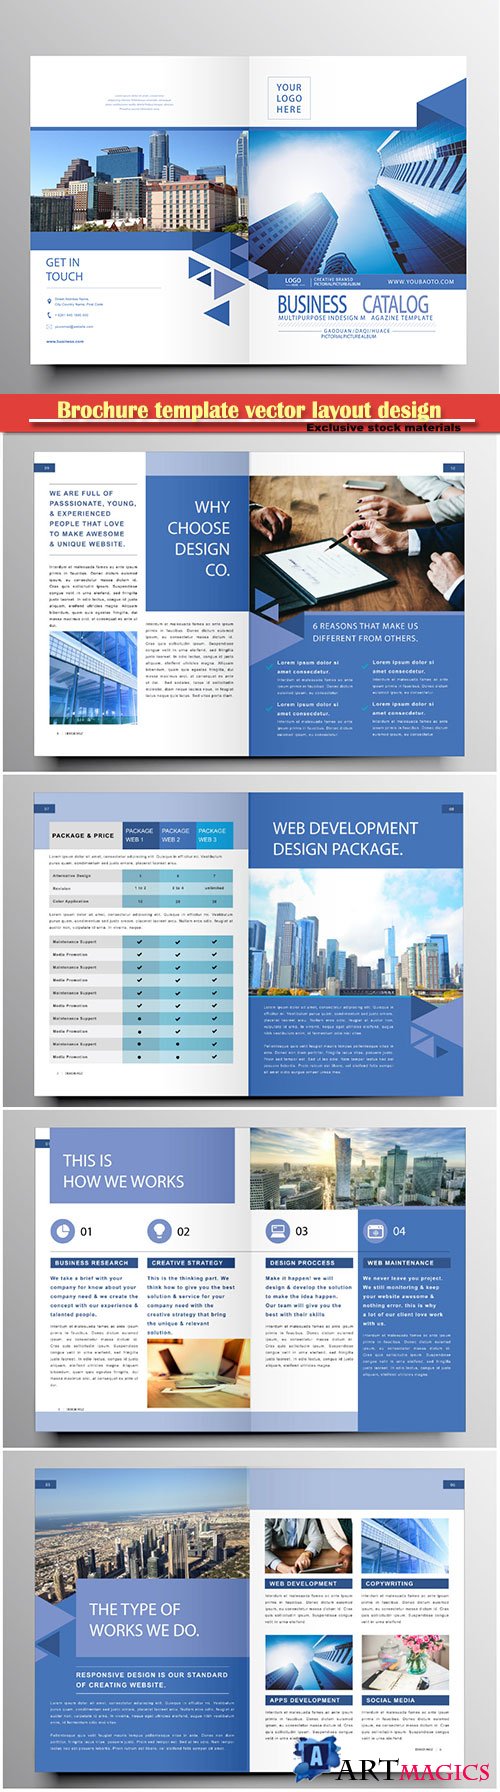 Brochure template vector layout design, corporate business annual report, magazine, flyer mockup # 184